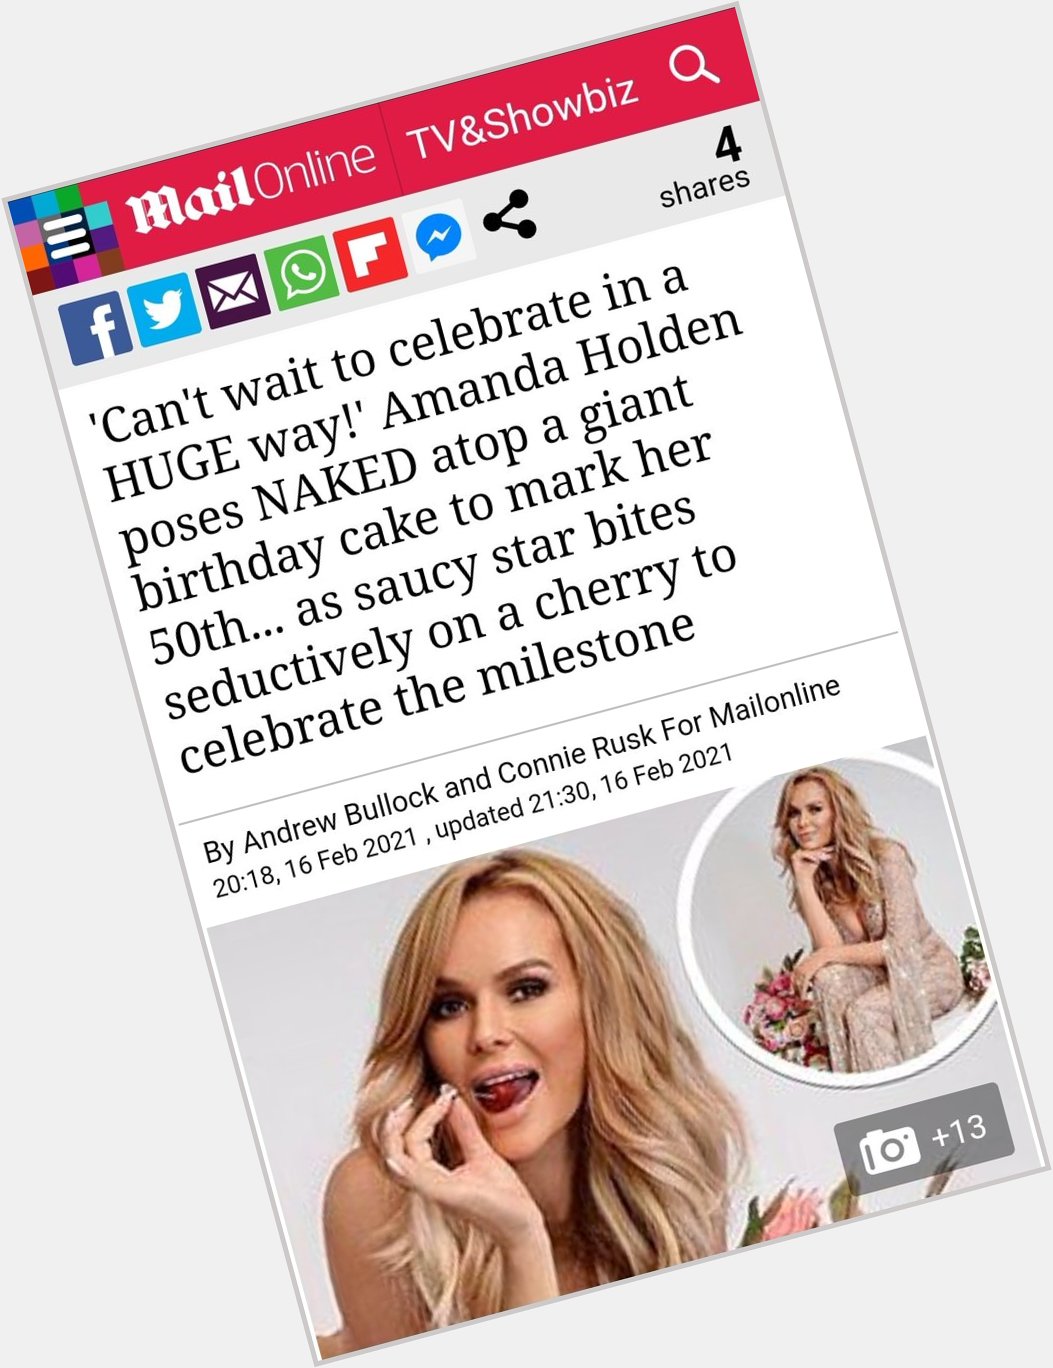 TOP RATED COMMENTS: MailOnline readers wish Amanda Holden a Happy Birthday in their trademark awful way. 